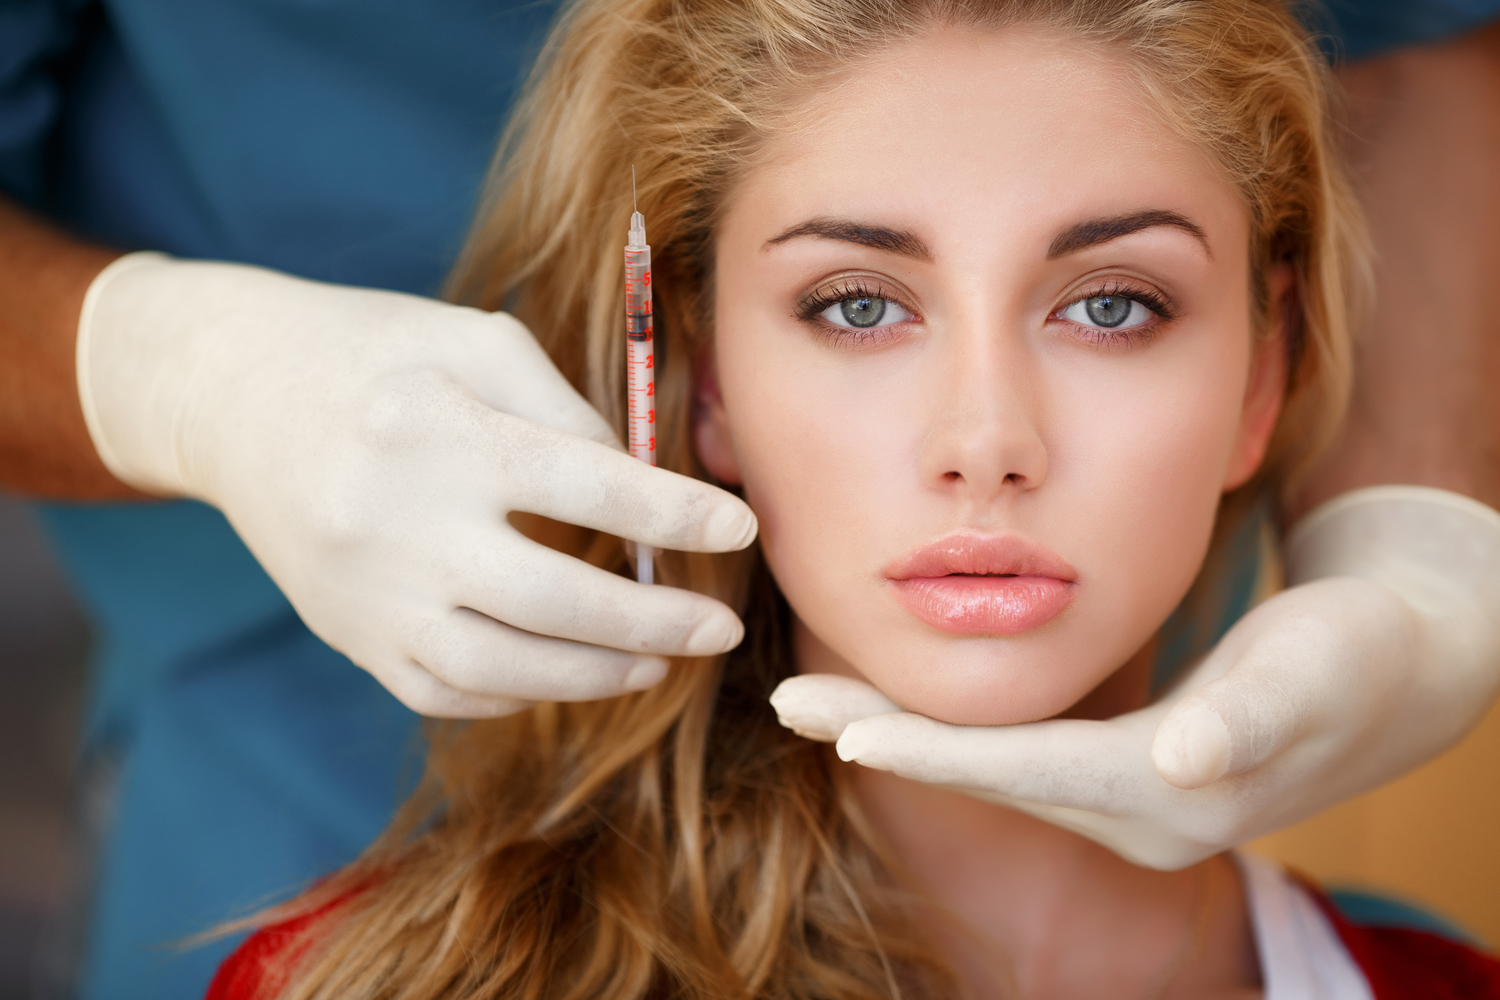 Botox as a Treatment for Specific Ailments